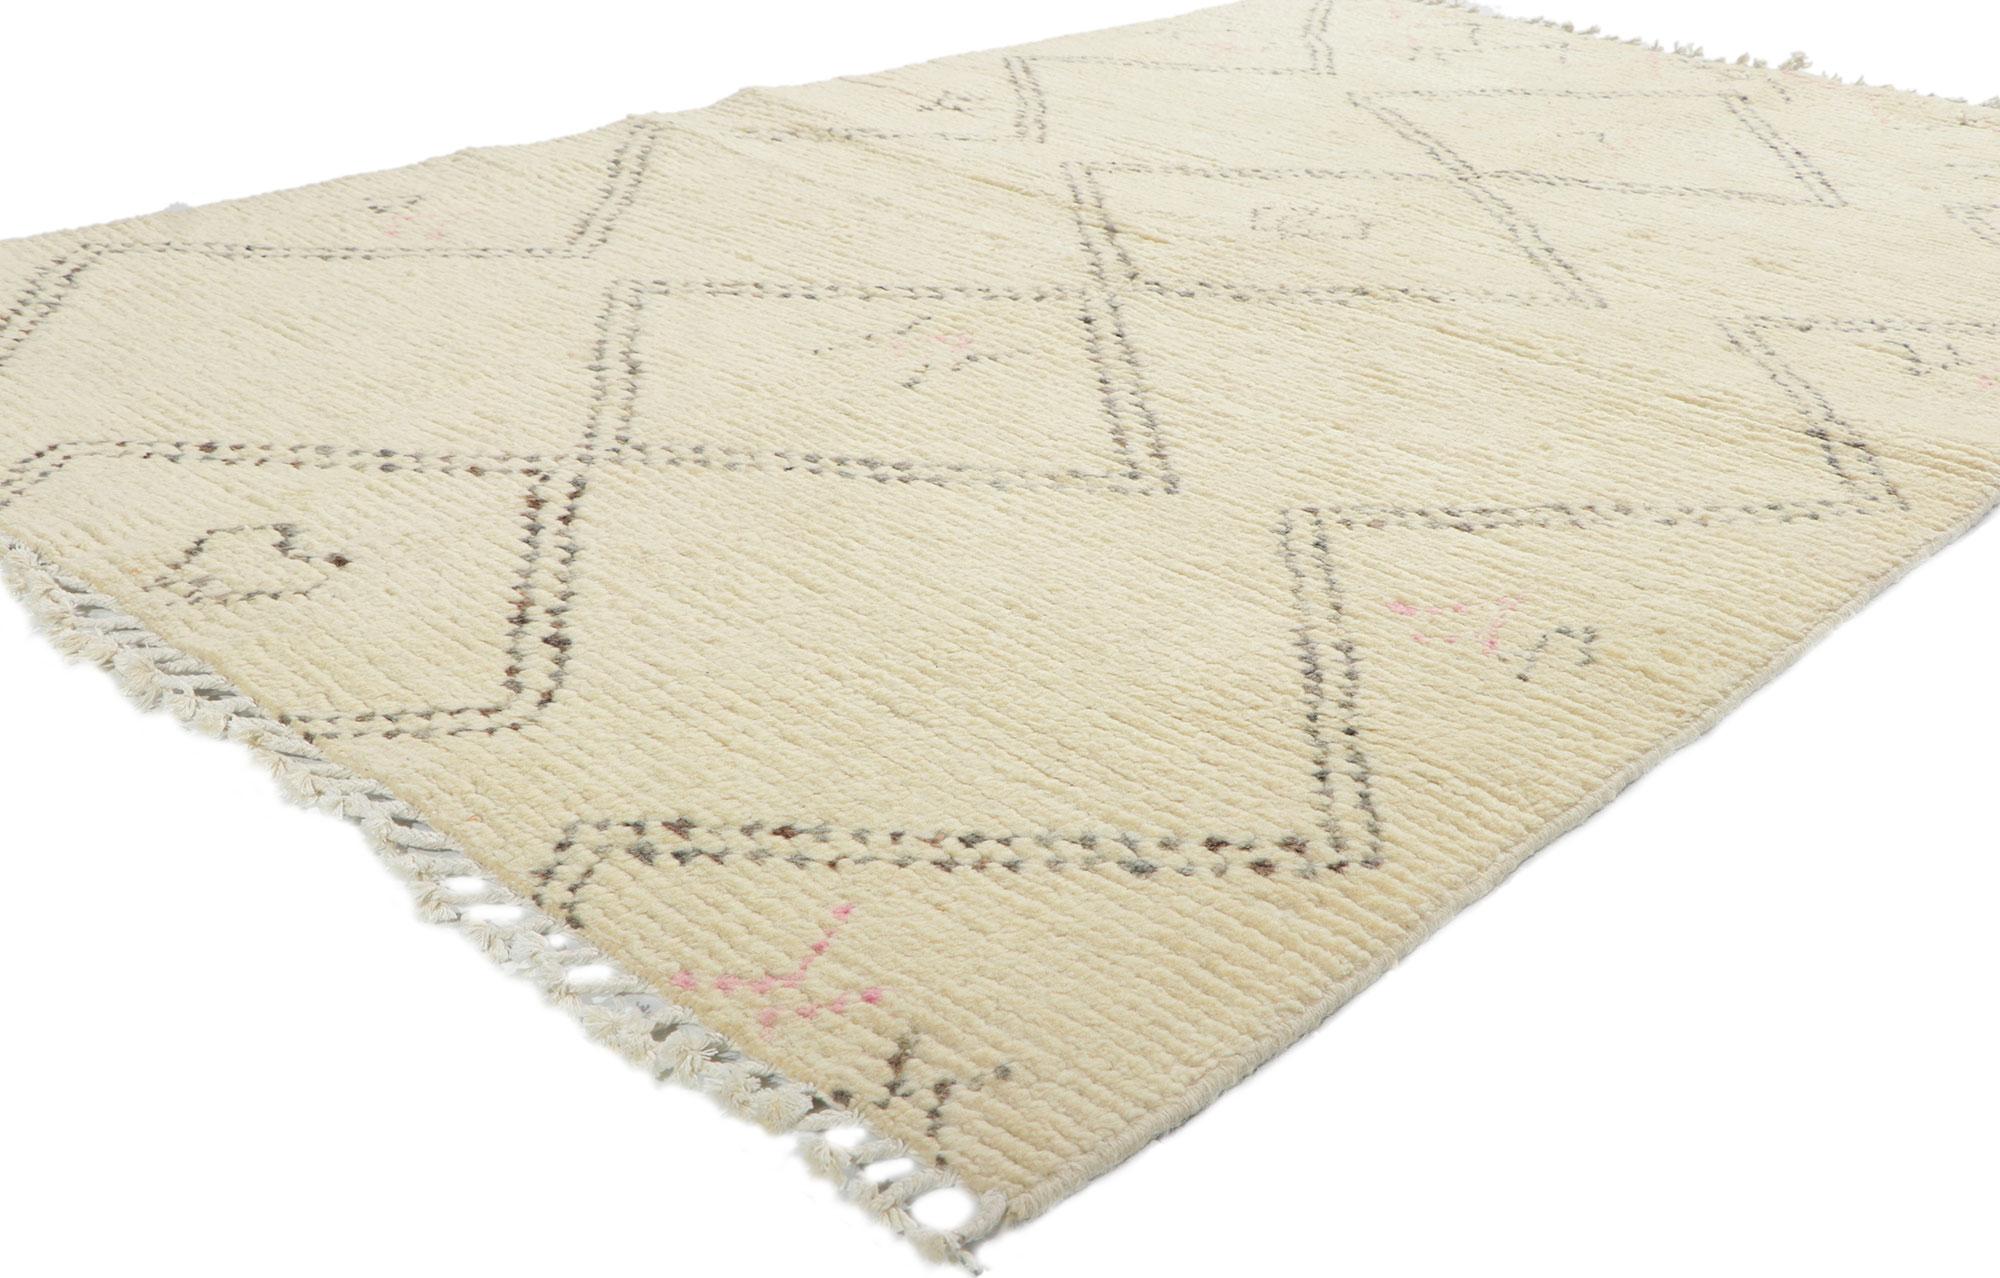 80627 New Tribal Moroccan Area rug, 04'10 x 07'05.
With its Hygge vibes, cozy contentment and plush pile, this hand knotted wool contemporary Moroccan area rug adds texture and subtle graphic appeal forming a warm, relaxed space. The creamy-beige